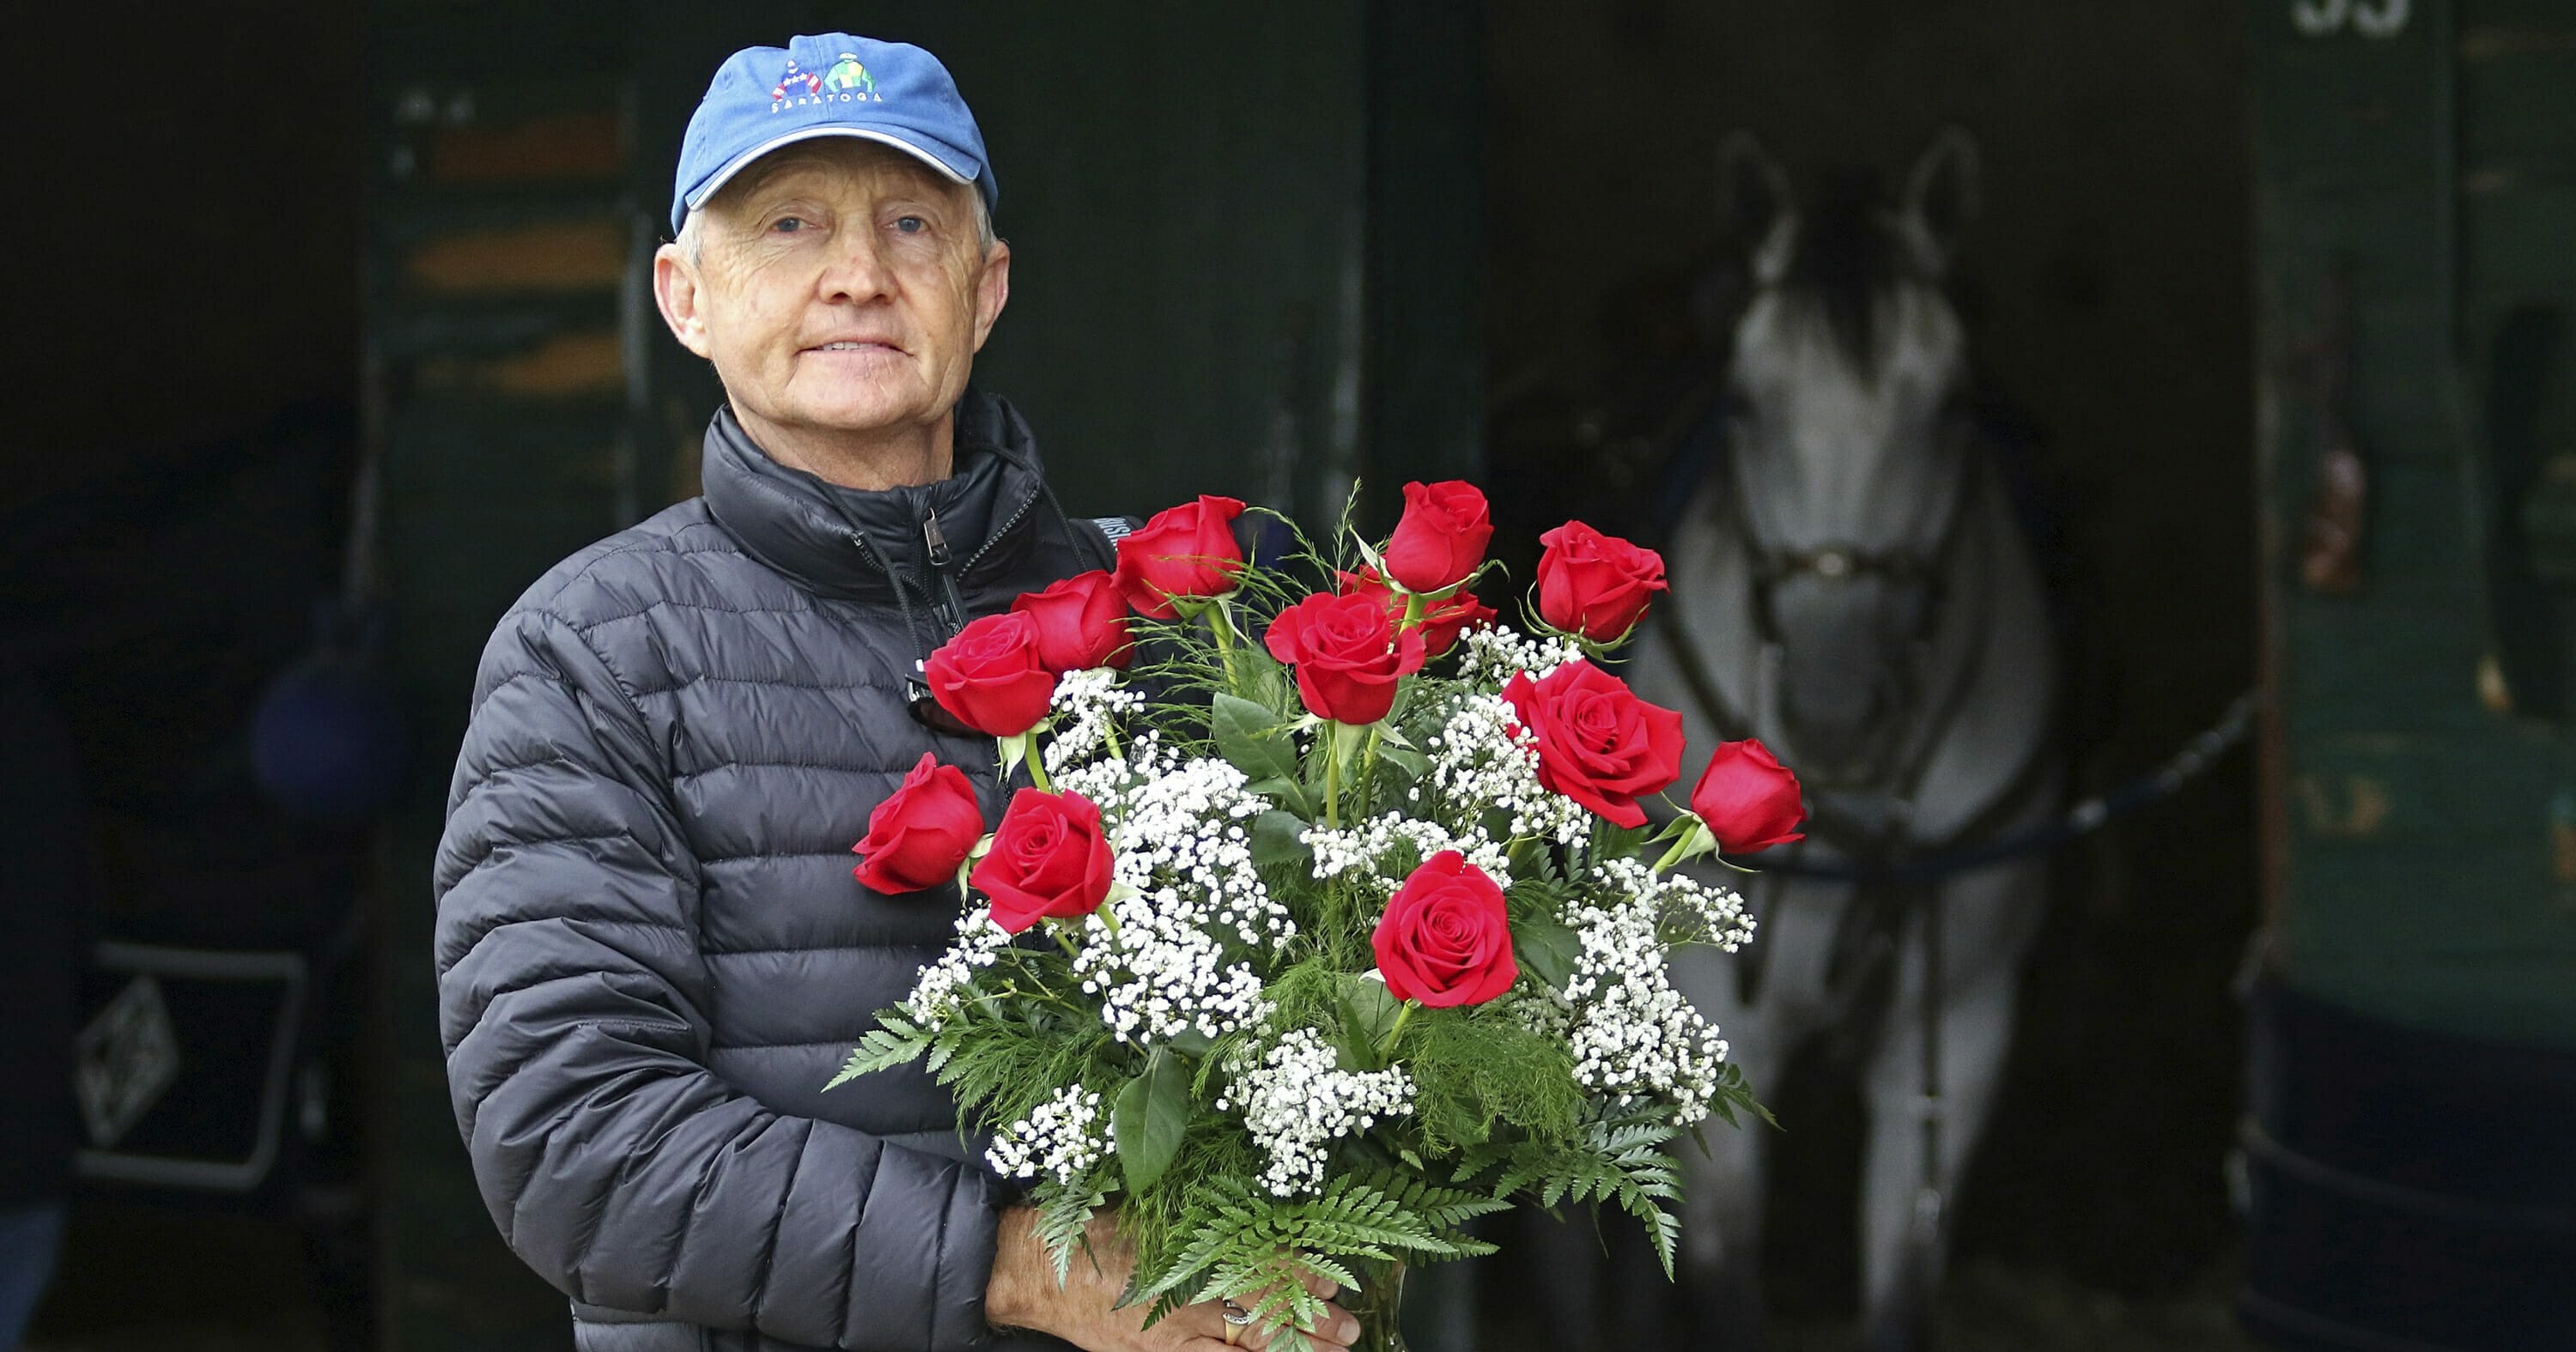 Jason Servis, trainer of Maximum Security, who was disqualified from first place in the Kentucky Derby, stands outside his barn at Monmouth Park on May 9, 2019 with a dozen roses.